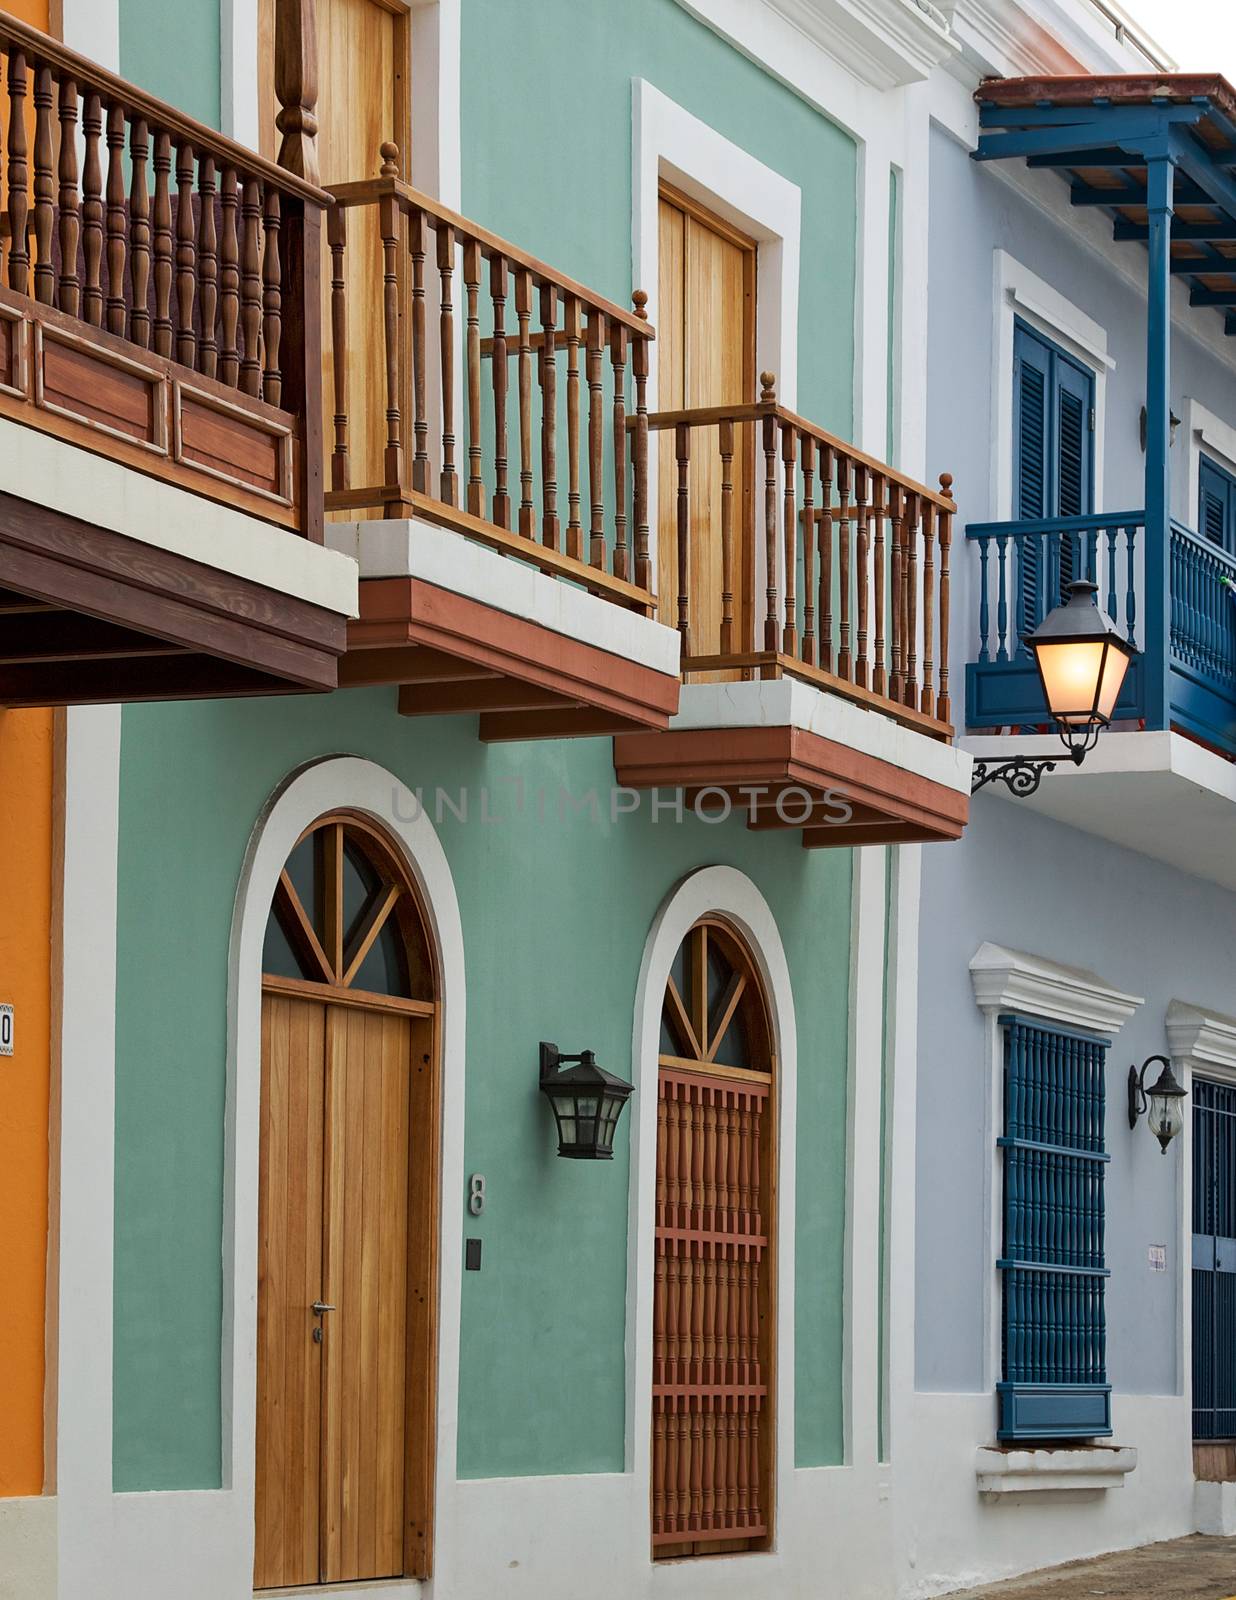 Homes in Old San Juan with many colors and plants adorning the balconies.
Photo taken on: June 15th, 2013